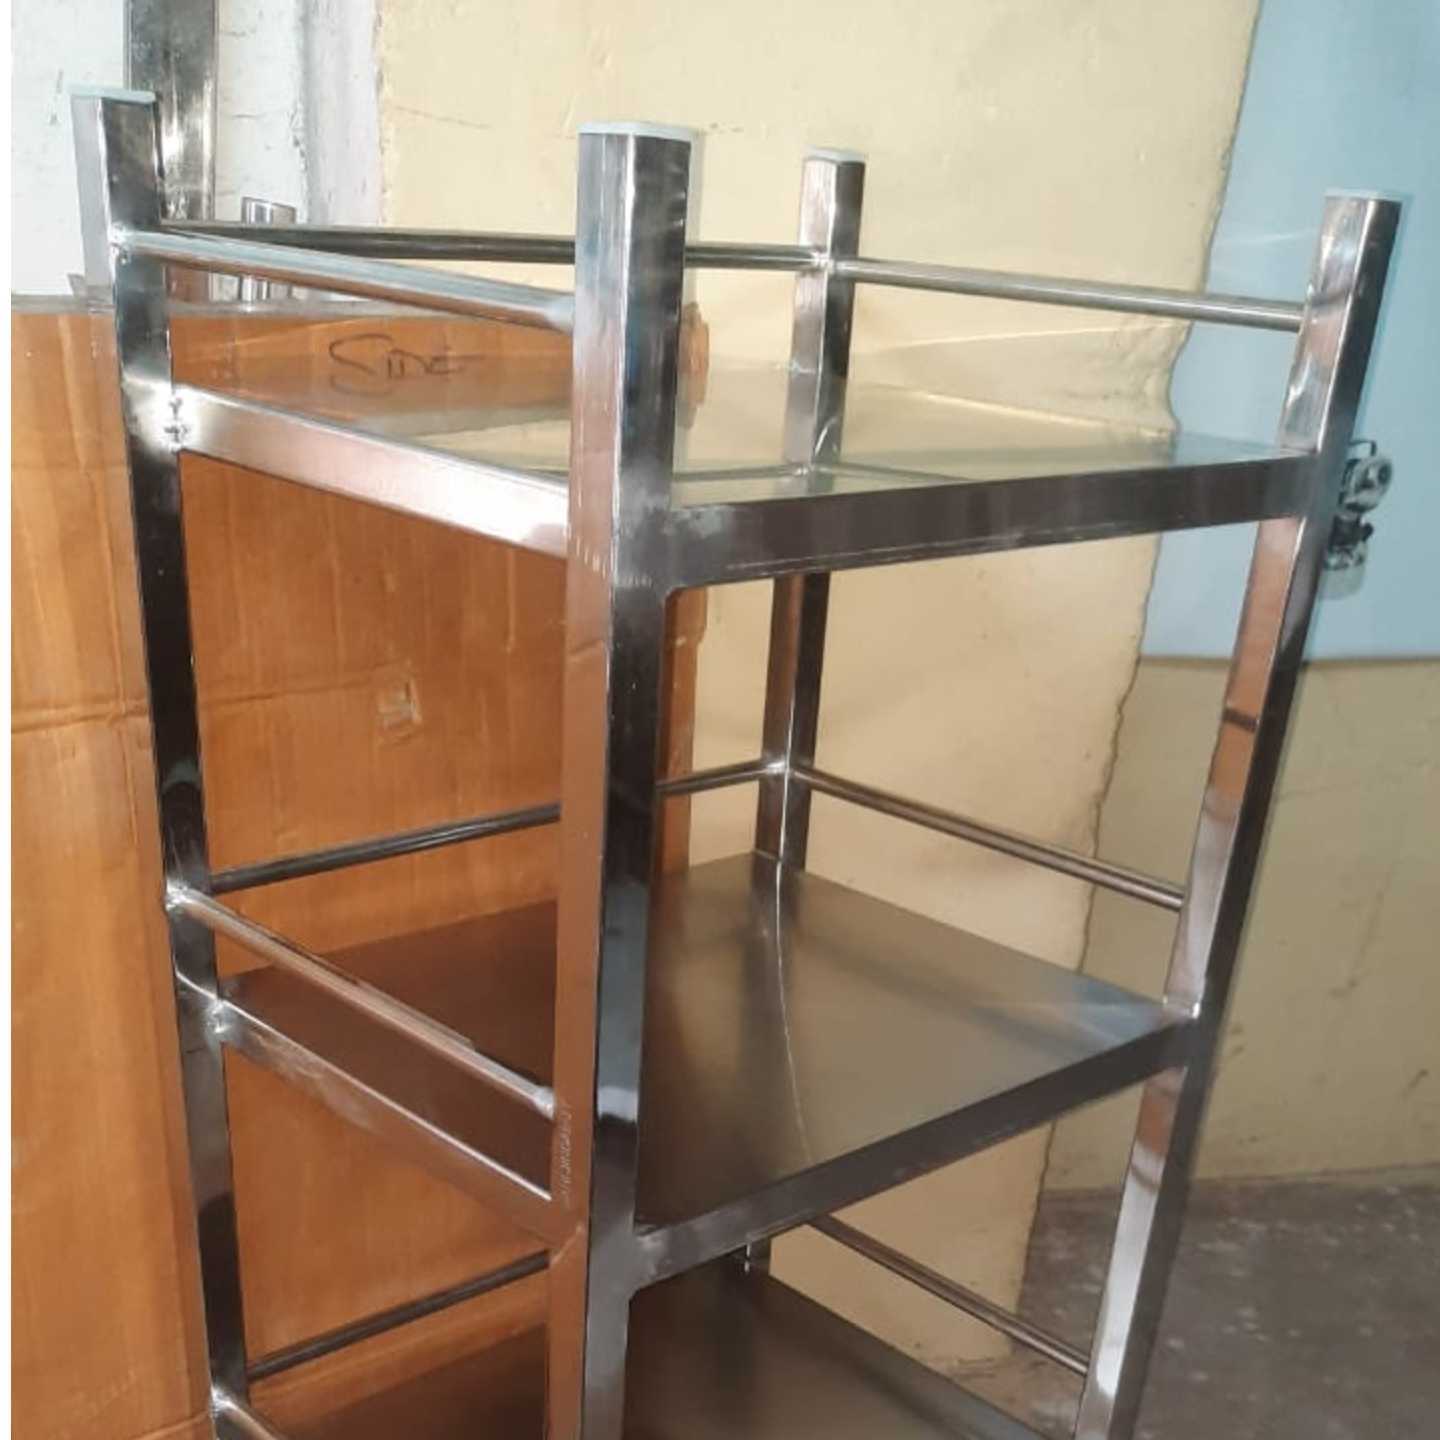 INSTRUMENT TROLLEY STAINLESS STEEL